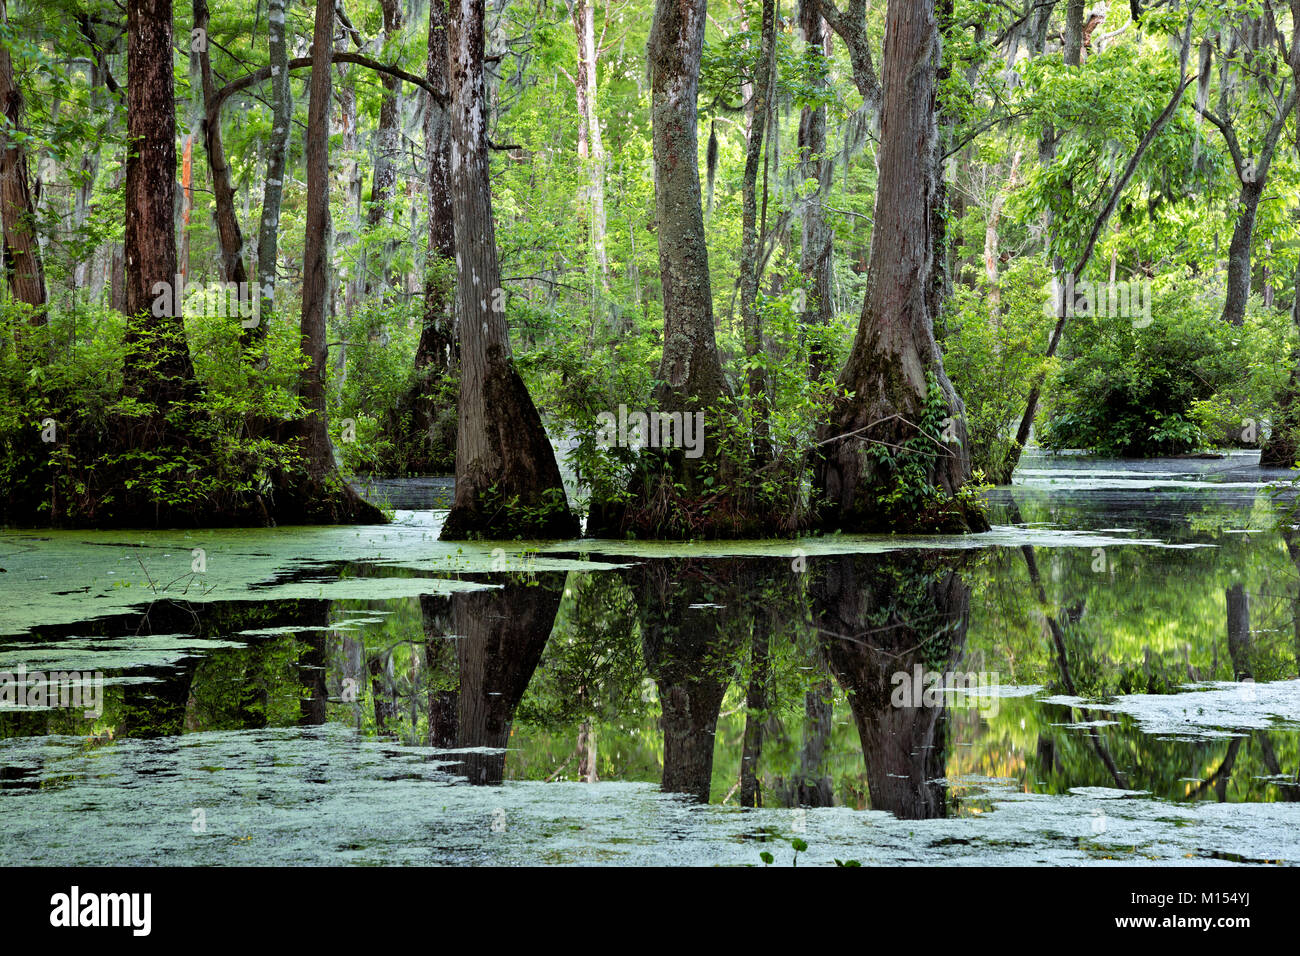 NC01481-00...NORTH CAROLINA - Bald cypress and tupalo gum trees surrounded by a floating mat of duckweed in Merchant Millpond; at Merchant Millpond St Stock Photo